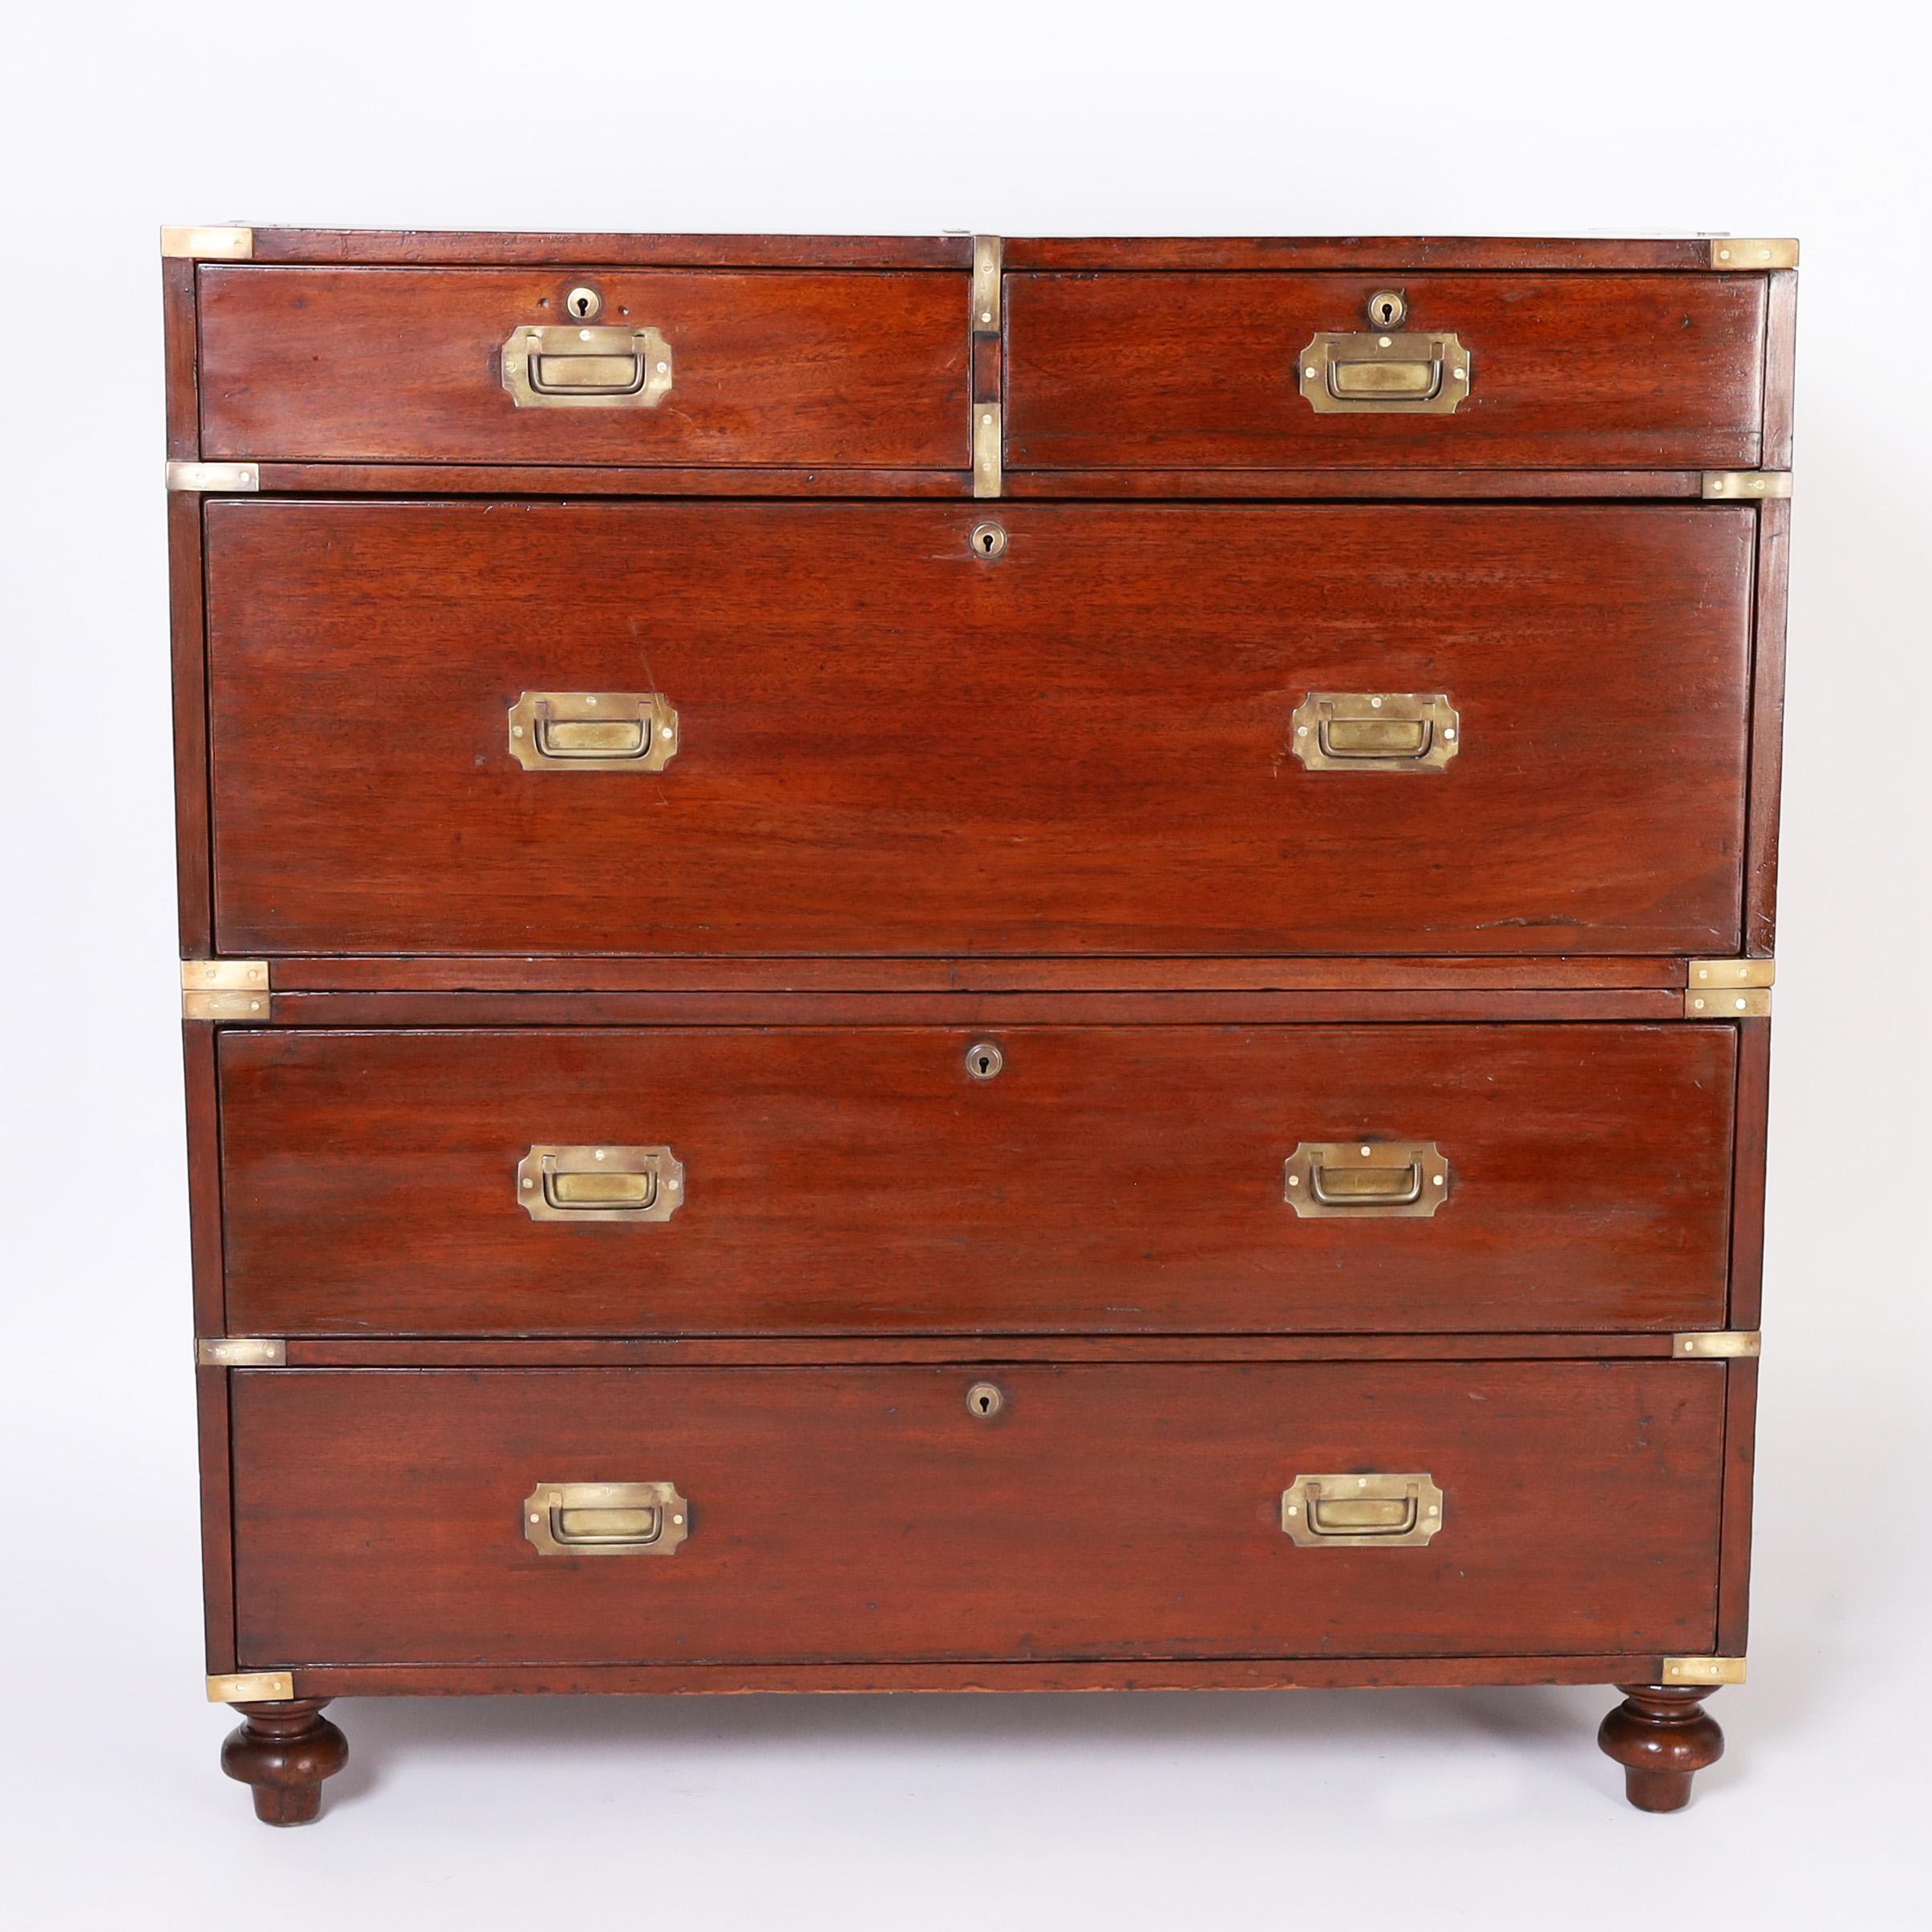 Handsome 19th century British colonial campaign chest hand crafted in mahogany with classic two piece construction, five drawers, brass hardware, and turned feet.